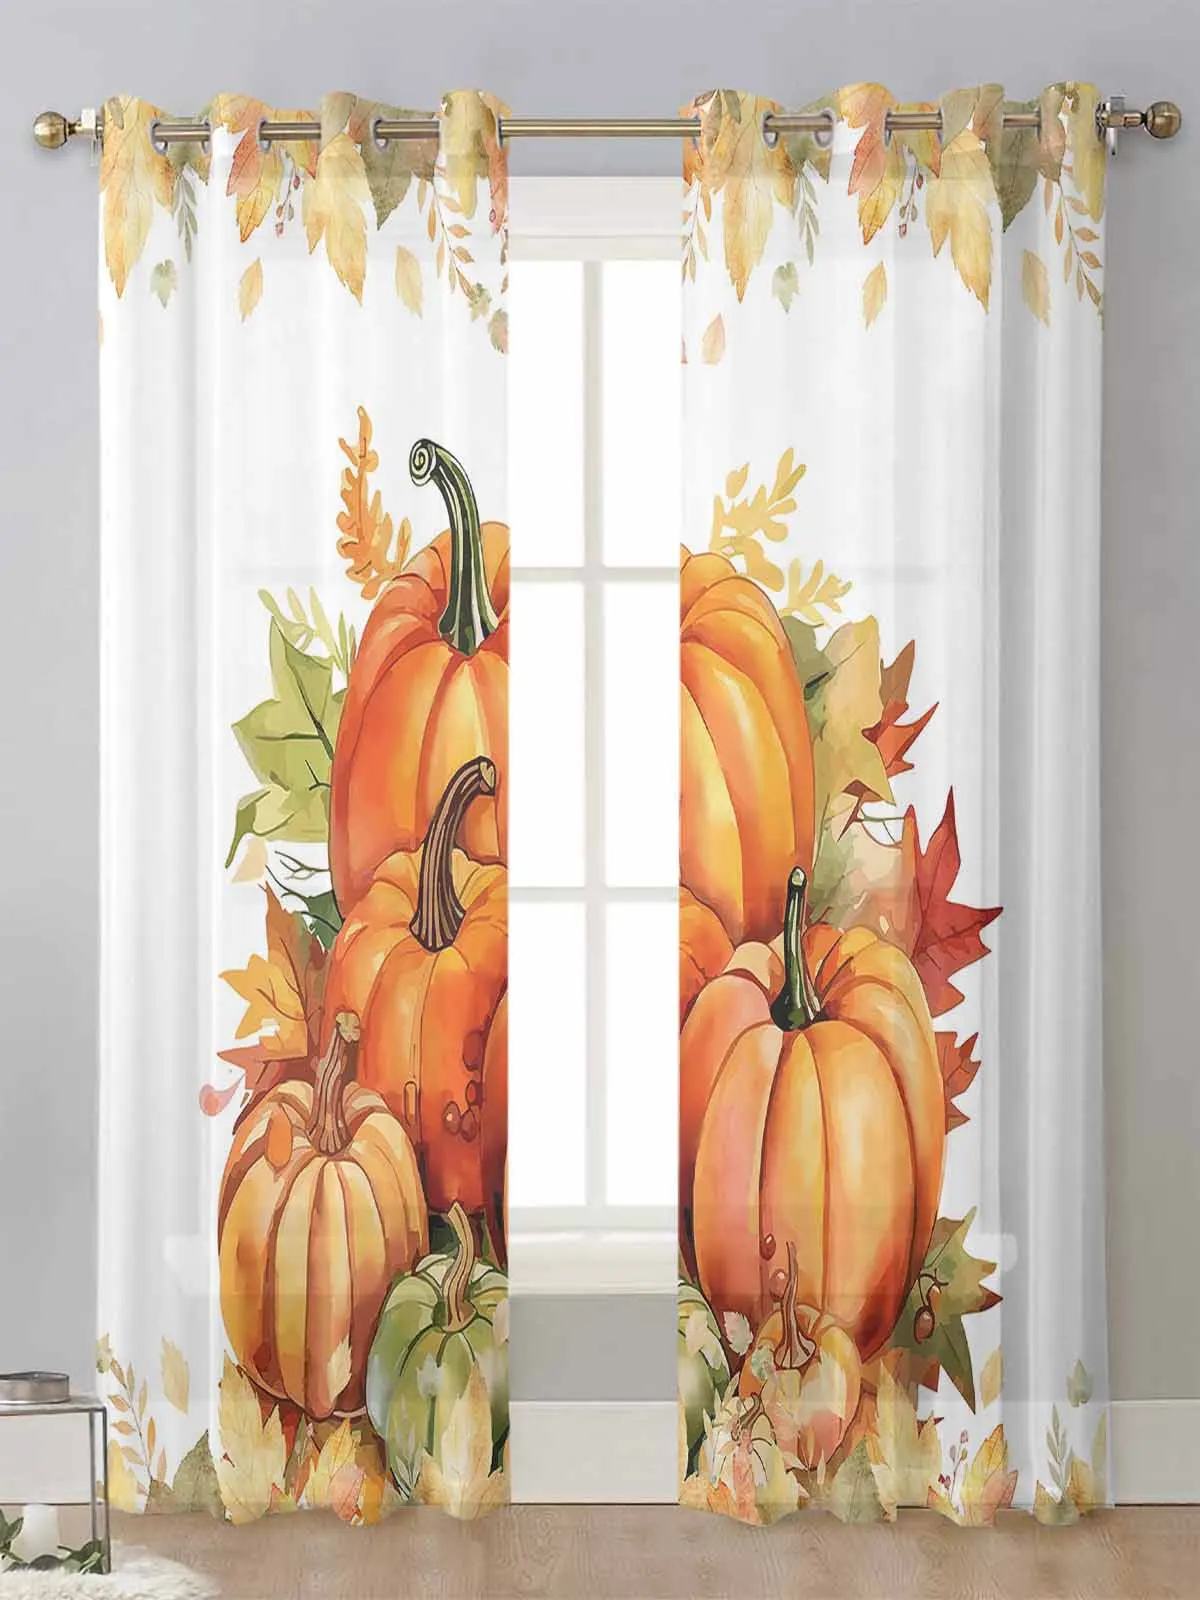 

Thanksgiving Pumpkin Fall Maple Leaf Sheer Curtains For Living Room Window Voile Tulle Curtain Cortinas Drapes Home Decor